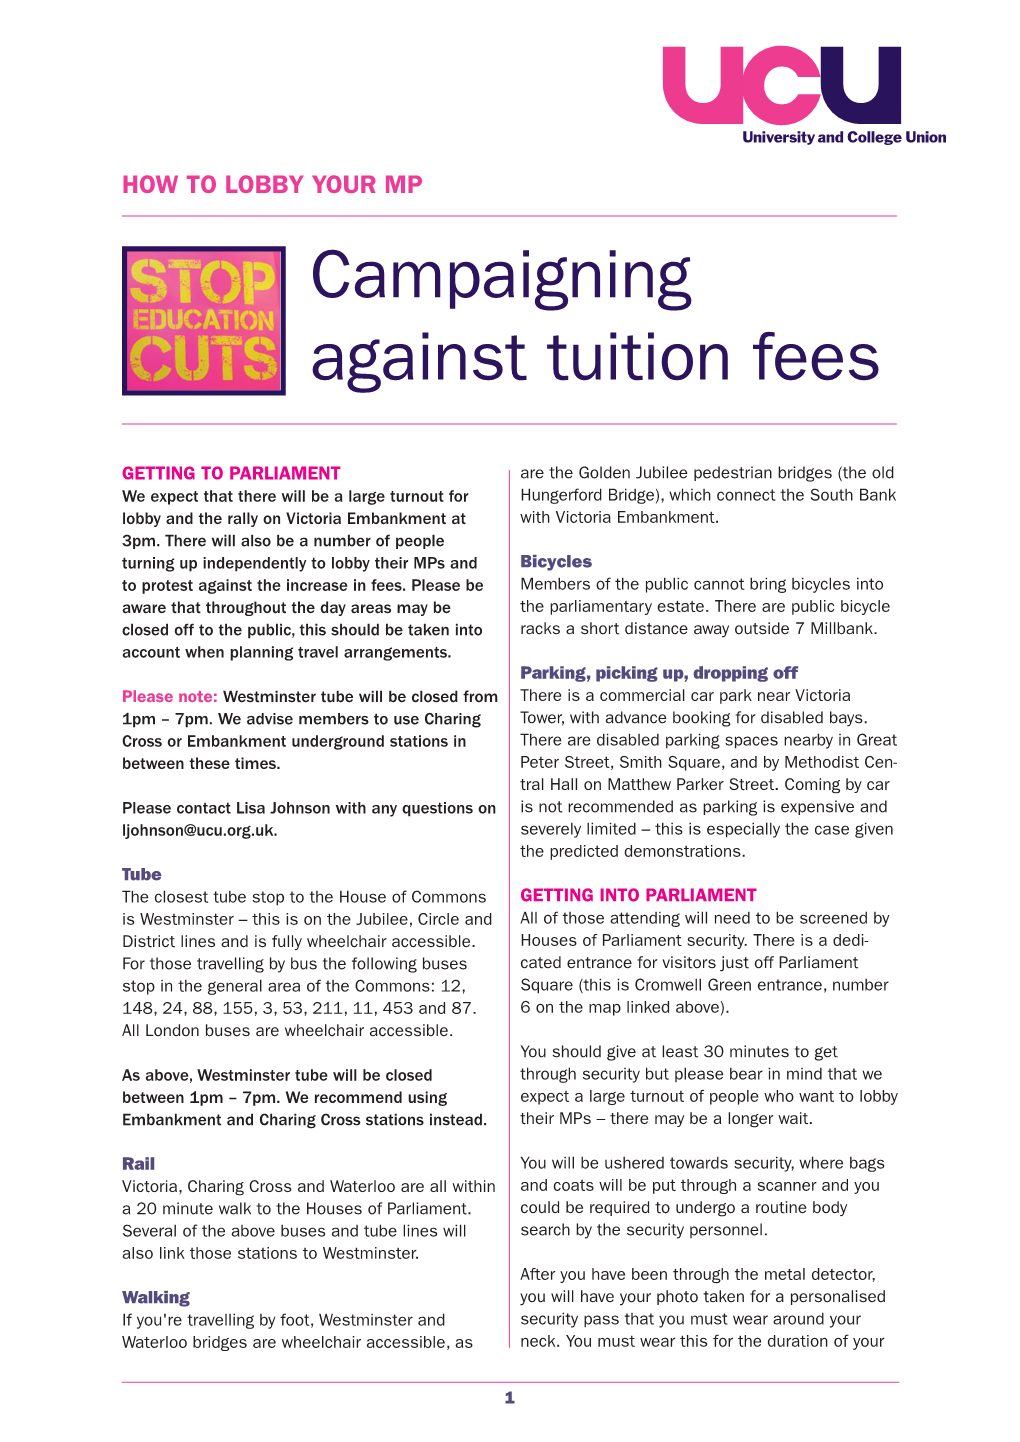 Stop Tuition Fees